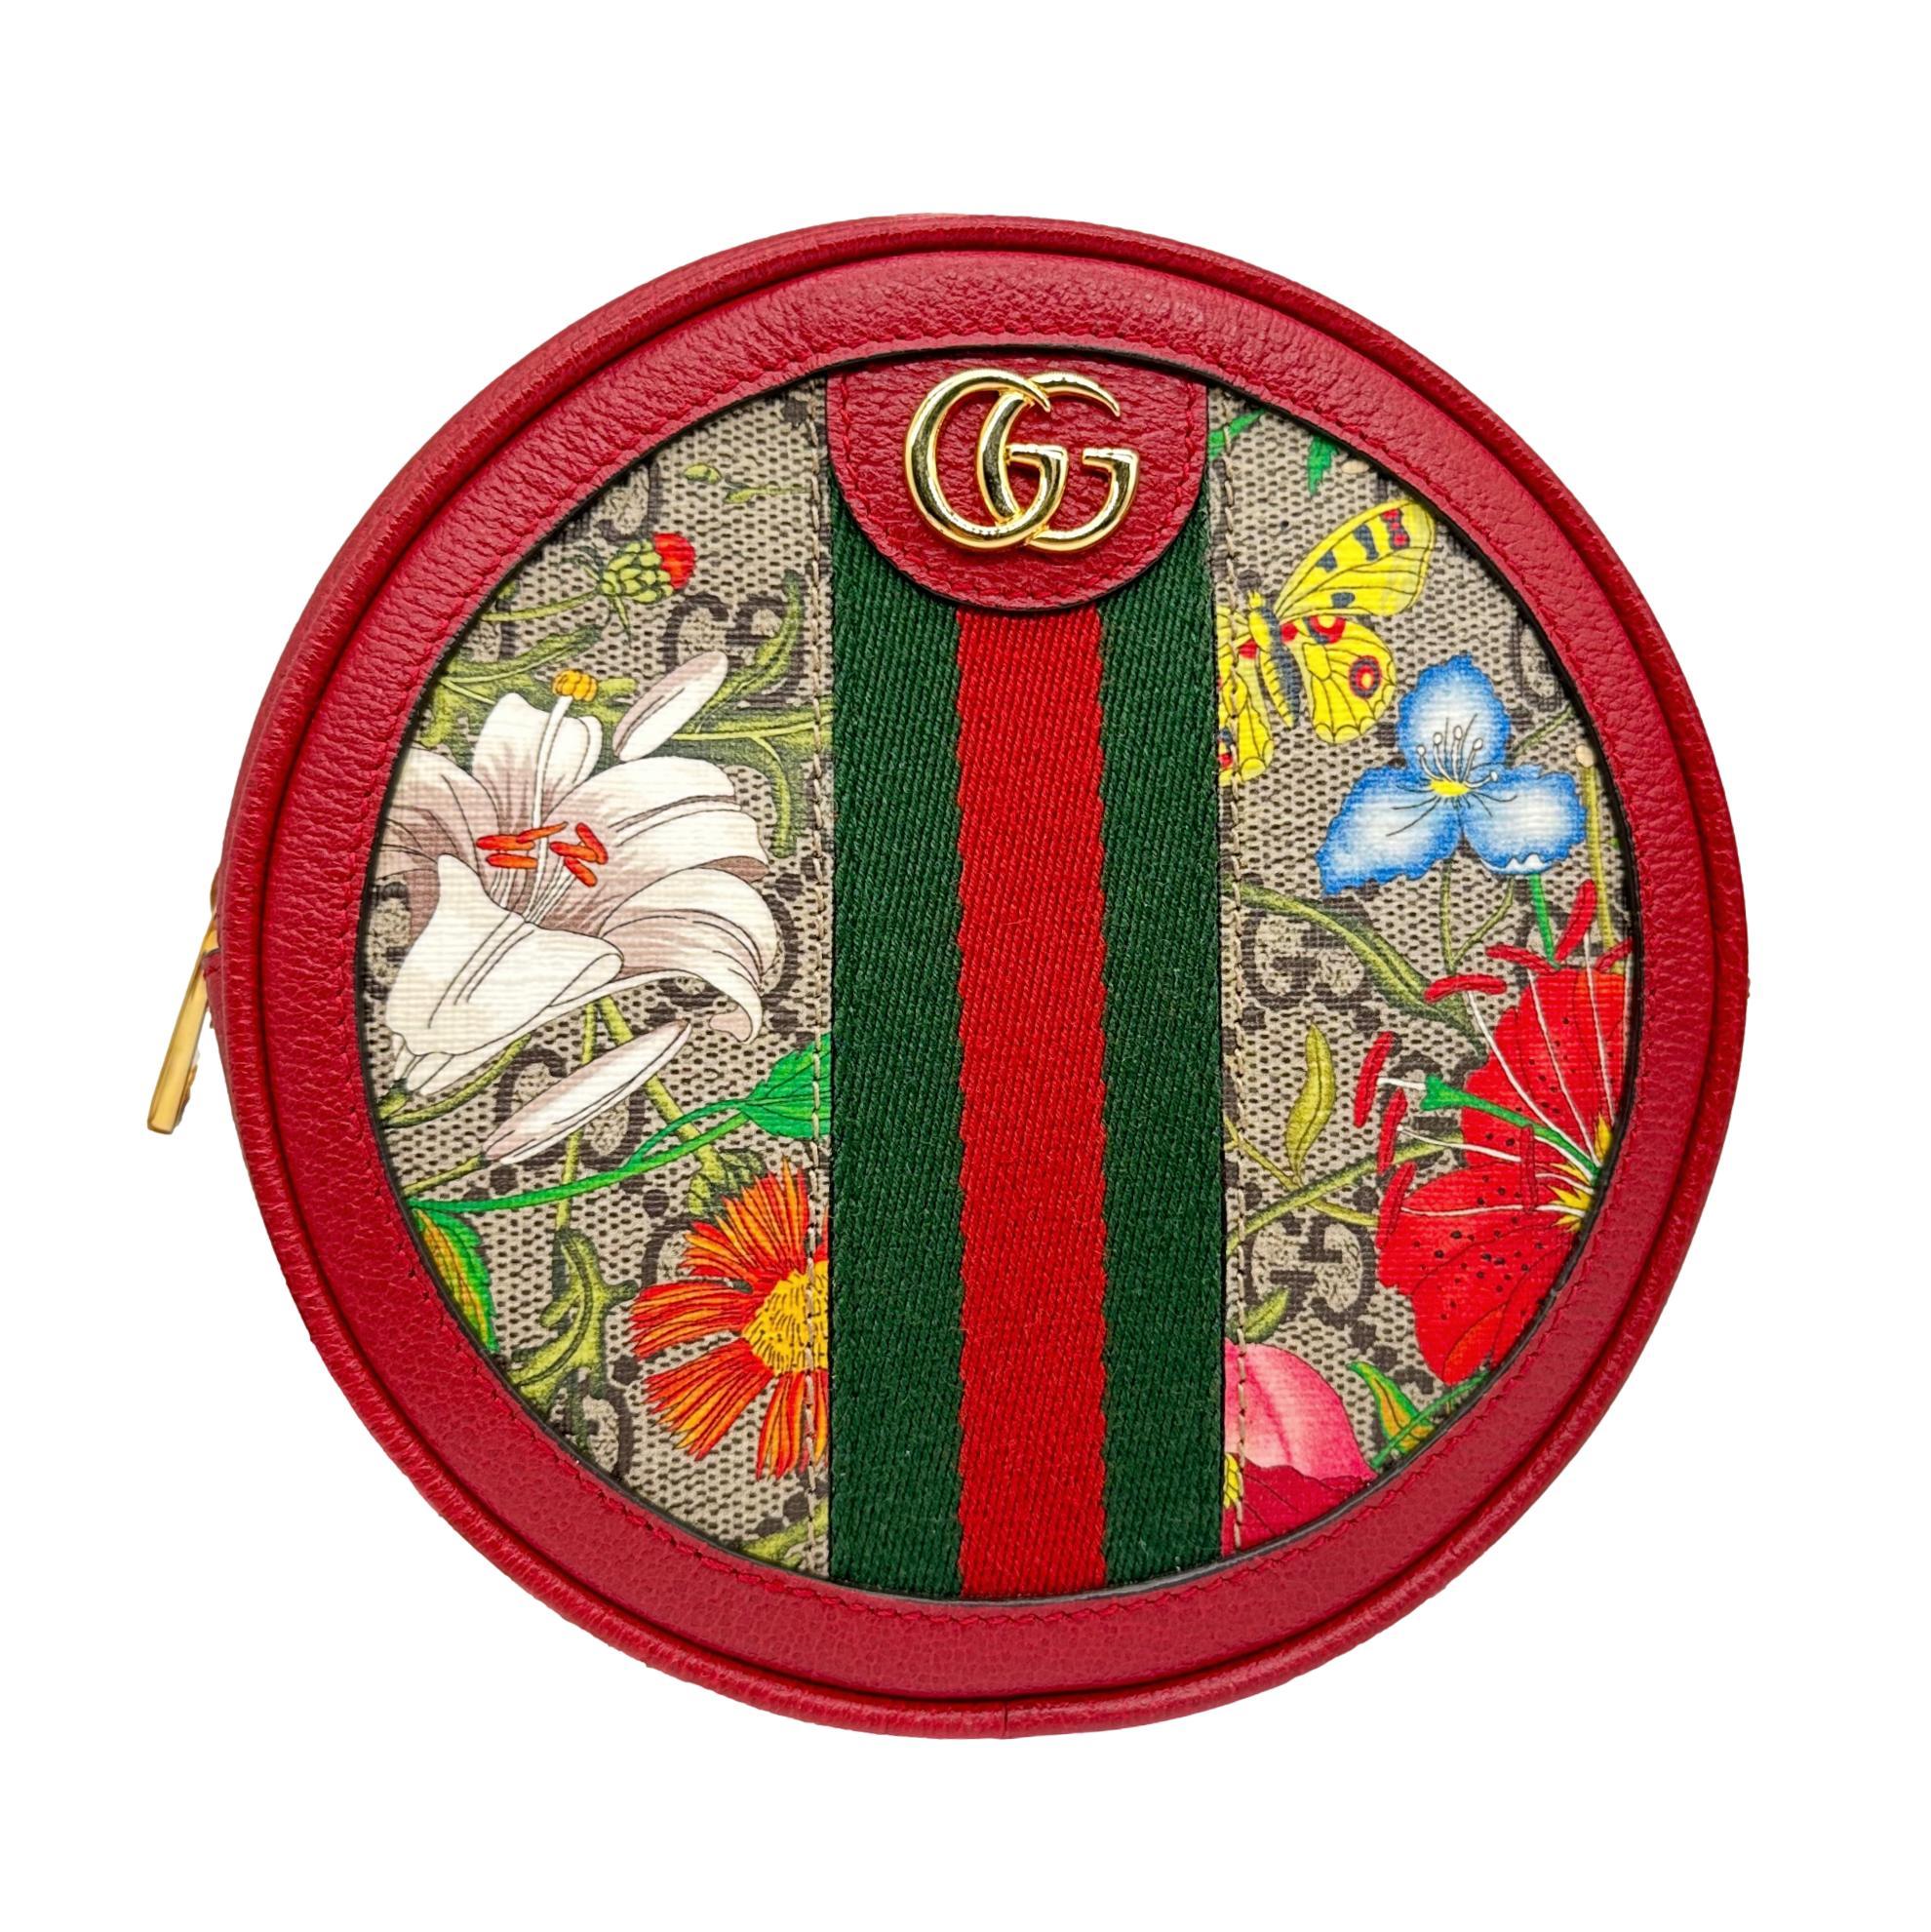 Gucci Ophidia Flora Motif GG Pattern Mini Round Leather Backpack, Cruise 2020. The classic Gucci GG monogram pattern takes a new look for this special limited edition Cruise 2020 line with the 